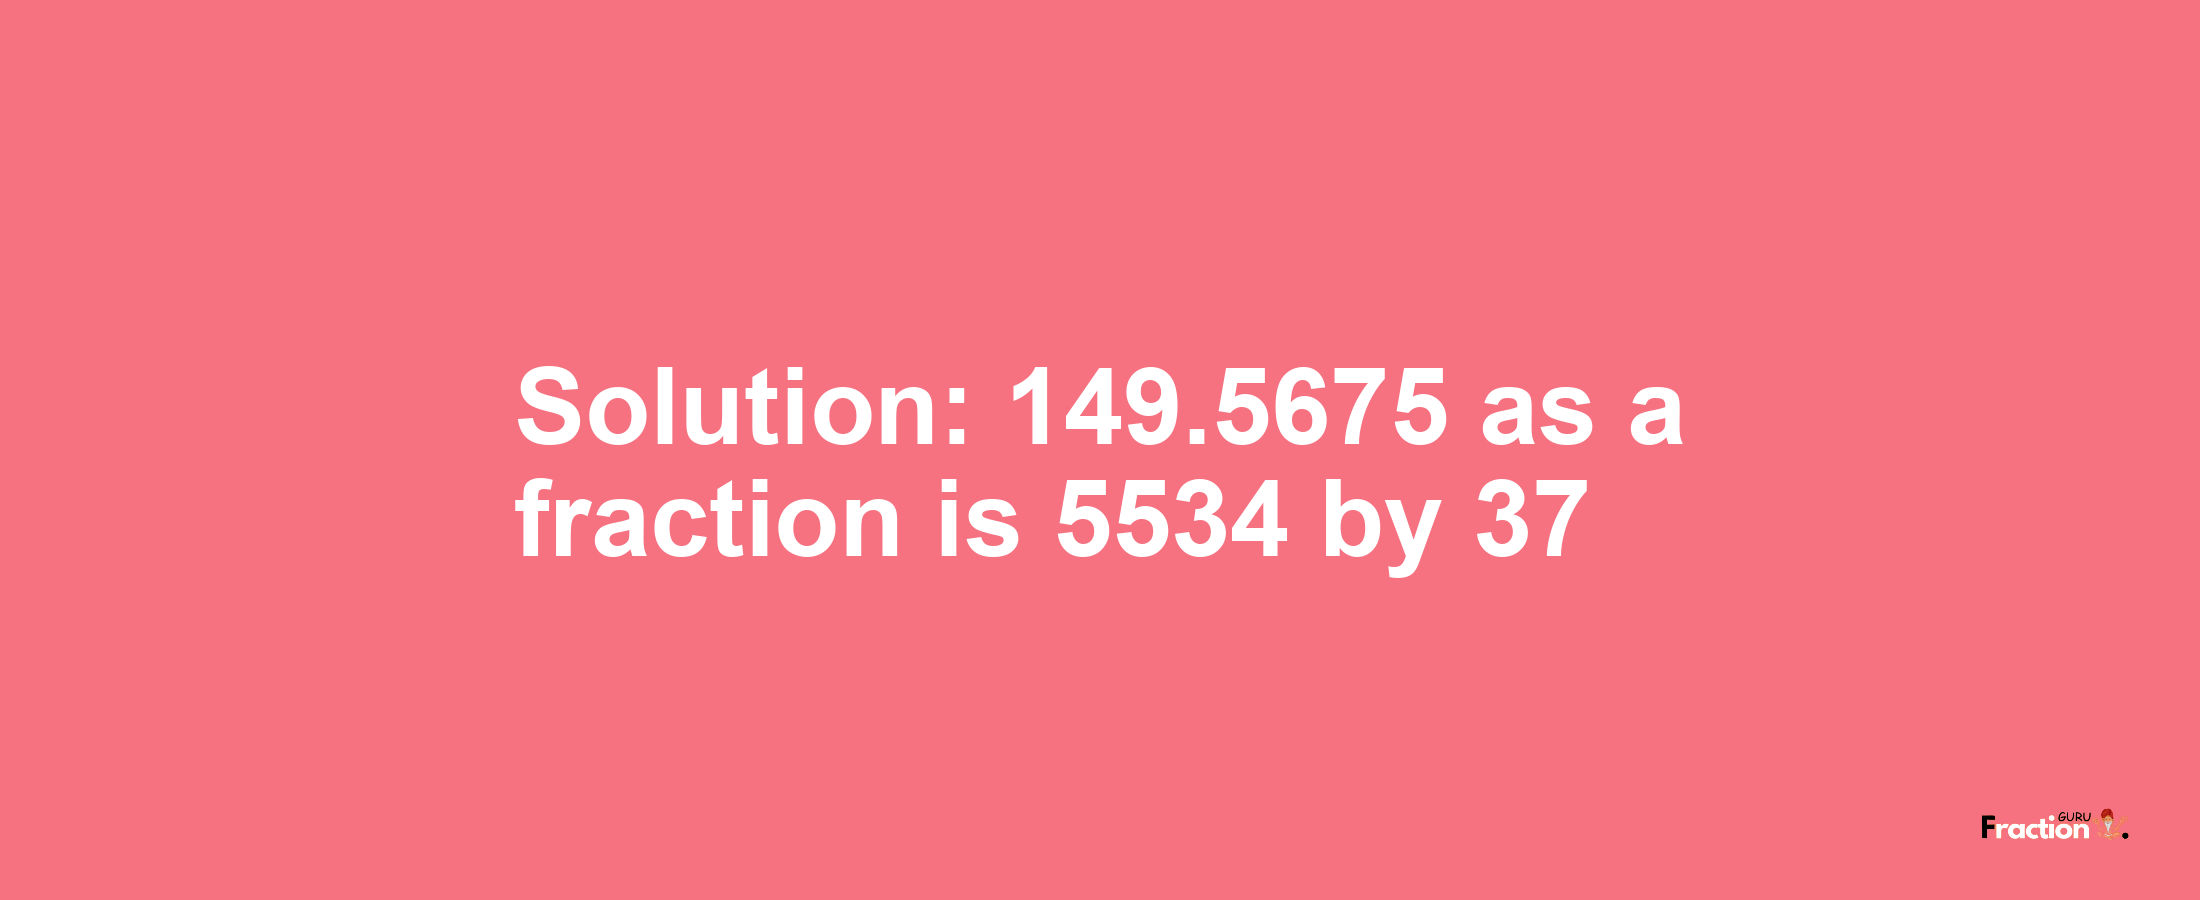 Solution:149.5675 as a fraction is 5534/37